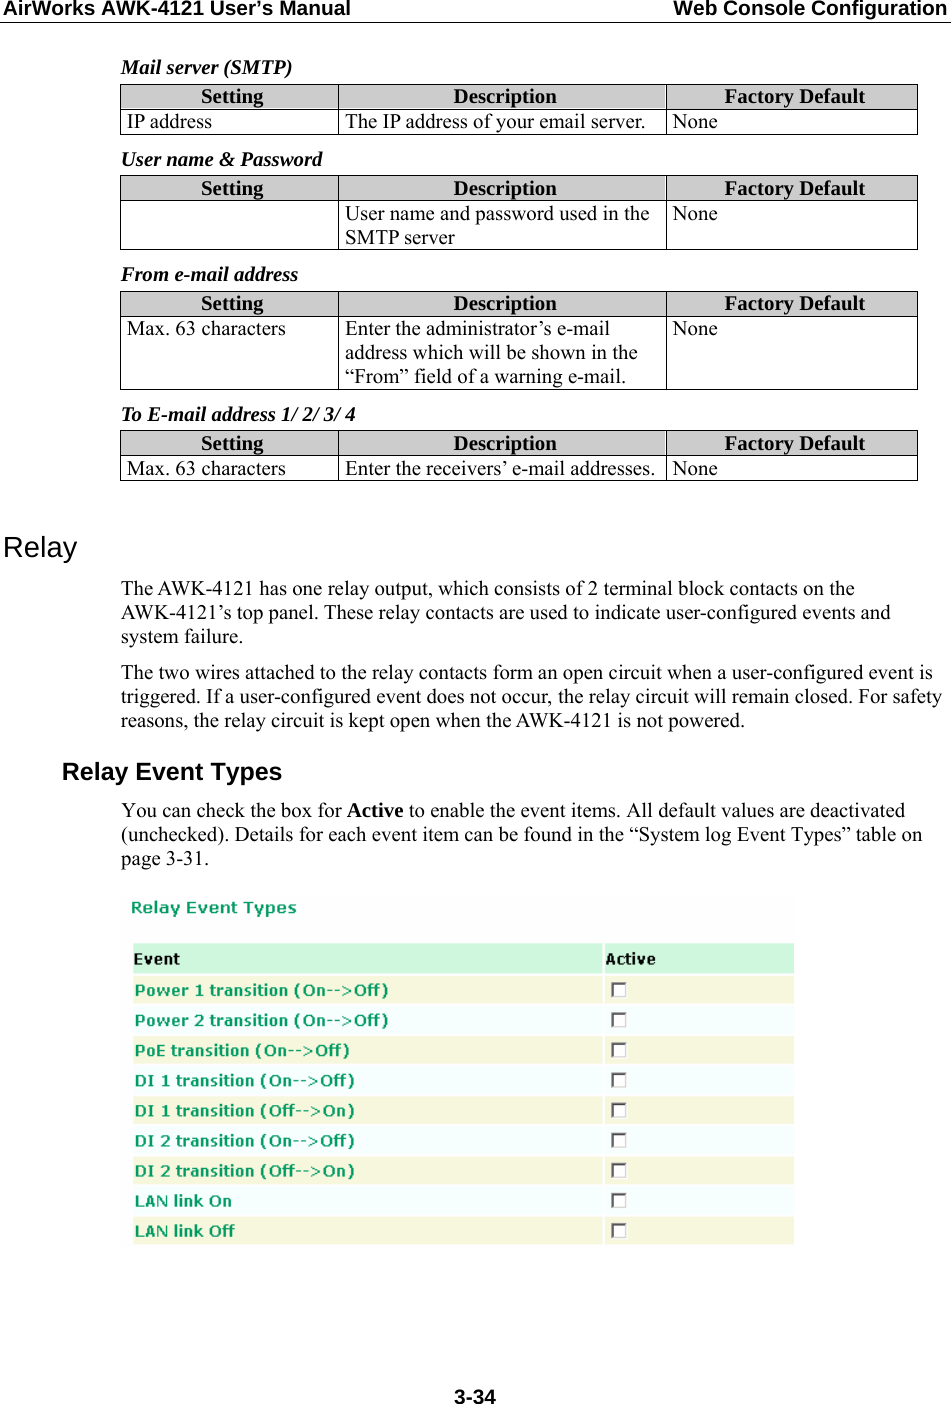 AirWorks AWK-4121 User’s Manual  Web Console Configuration Mail server (SMTP) Setting  Description  Factory Default IP address  The IP address of your email server.  None User name &amp; Password Setting  Description  Factory Default   User name and password used in the SMTP server None From e-mail address Setting  Description  Factory Default Max. 63 characters  Enter the administrator’s e-mail address which will be shown in the “From” field of a warning e-mail. None To E-mail address 1/ 2/ 3/ 4 Setting  Description  Factory Default Max. 63 characters  Enter the receivers’ e-mail addresses. None  Relay The AWK-4121 has one relay output, which consists of 2 terminal block contacts on the AWK-4121’s top panel. These relay contacts are used to indicate user-configured events and system failure.   The two wires attached to the relay contacts form an open circuit when a user-configured event is triggered. If a user-configured event does not occur, the relay circuit will remain closed. For safety reasons, the relay circuit is kept open when the AWK-4121 is not powered. Relay Event Types You can check the box for Active to enable the event items. All default values are deactivated (unchecked). Details for each event item can be found in the “System log Event Types” table on page 3-31.      3-34